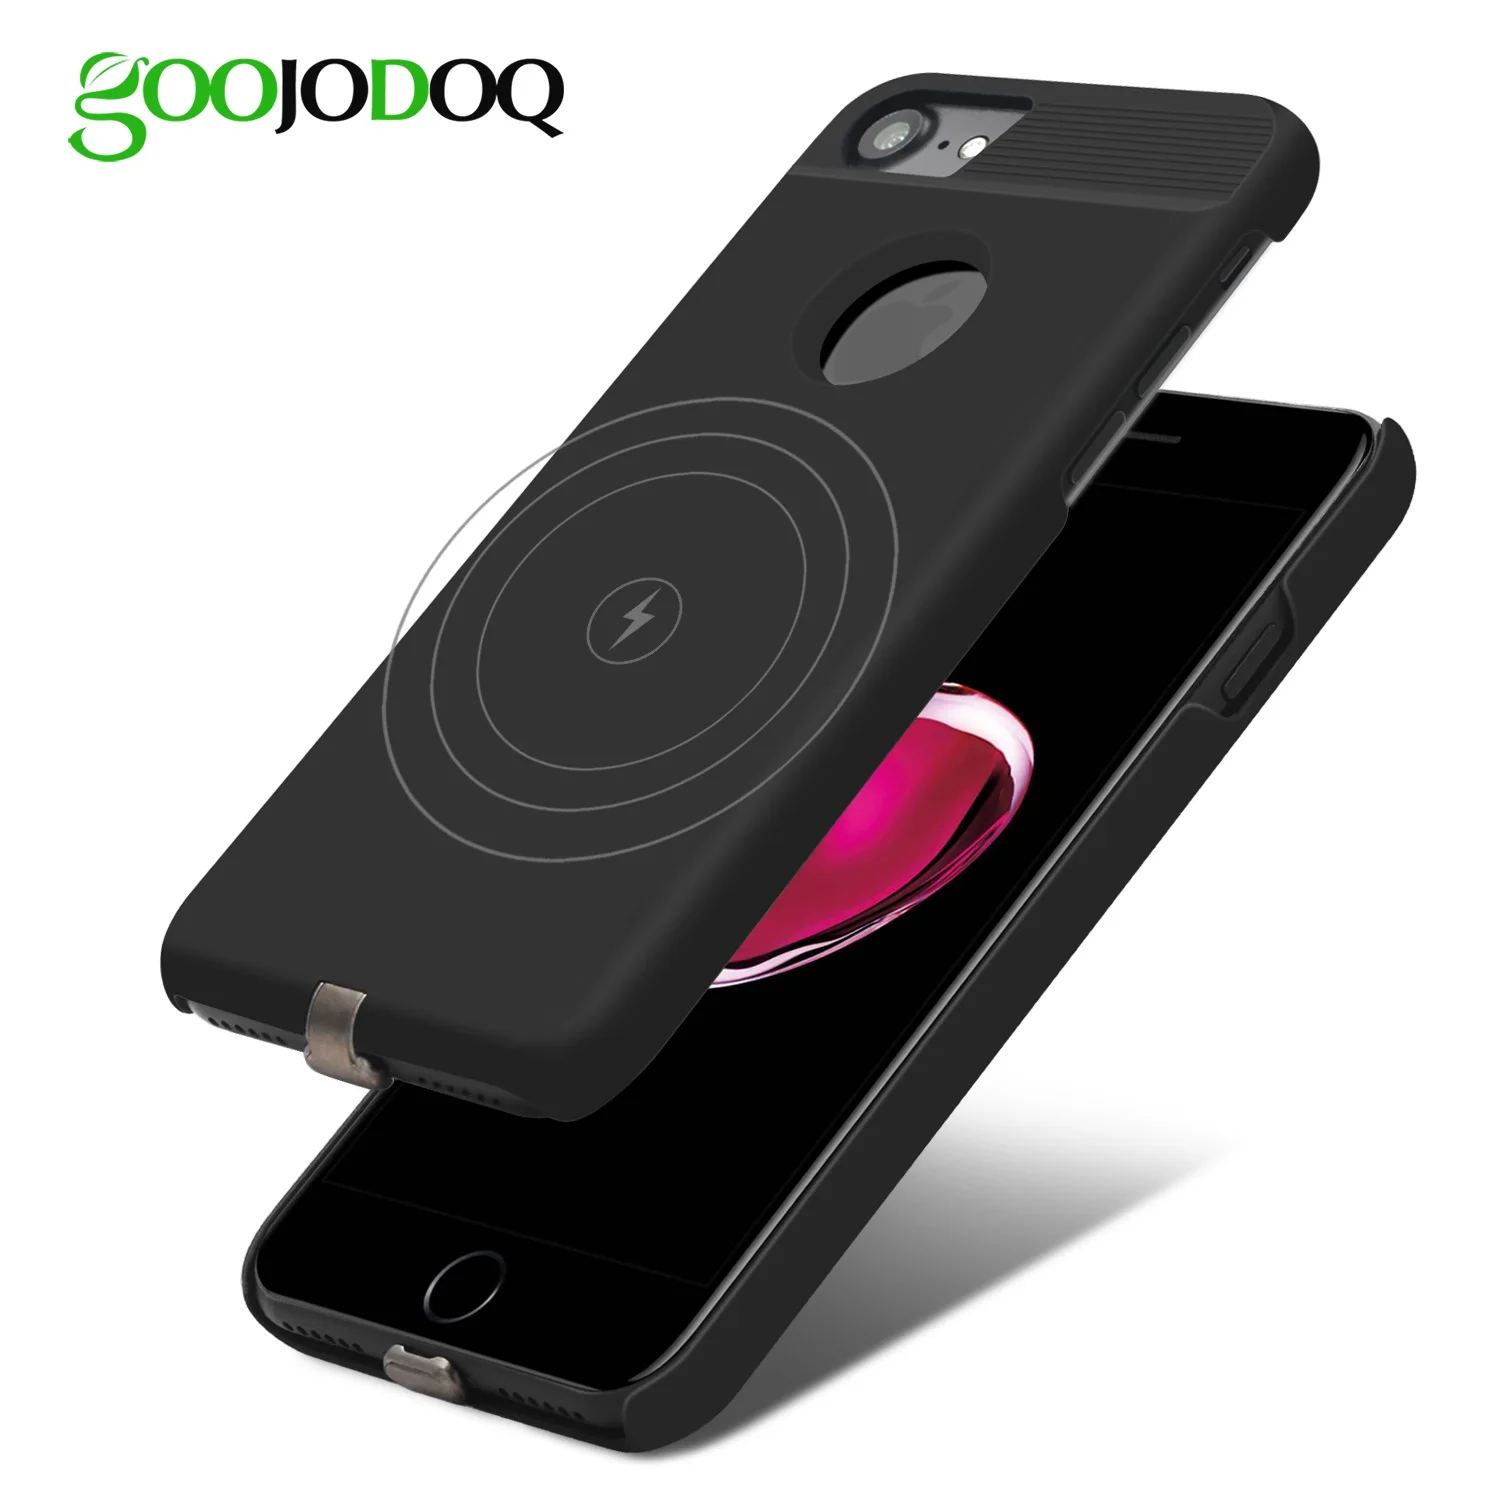 Qi Wireless Charger Receiver Case For iPhone 7 6 6s Mobile Phone Case